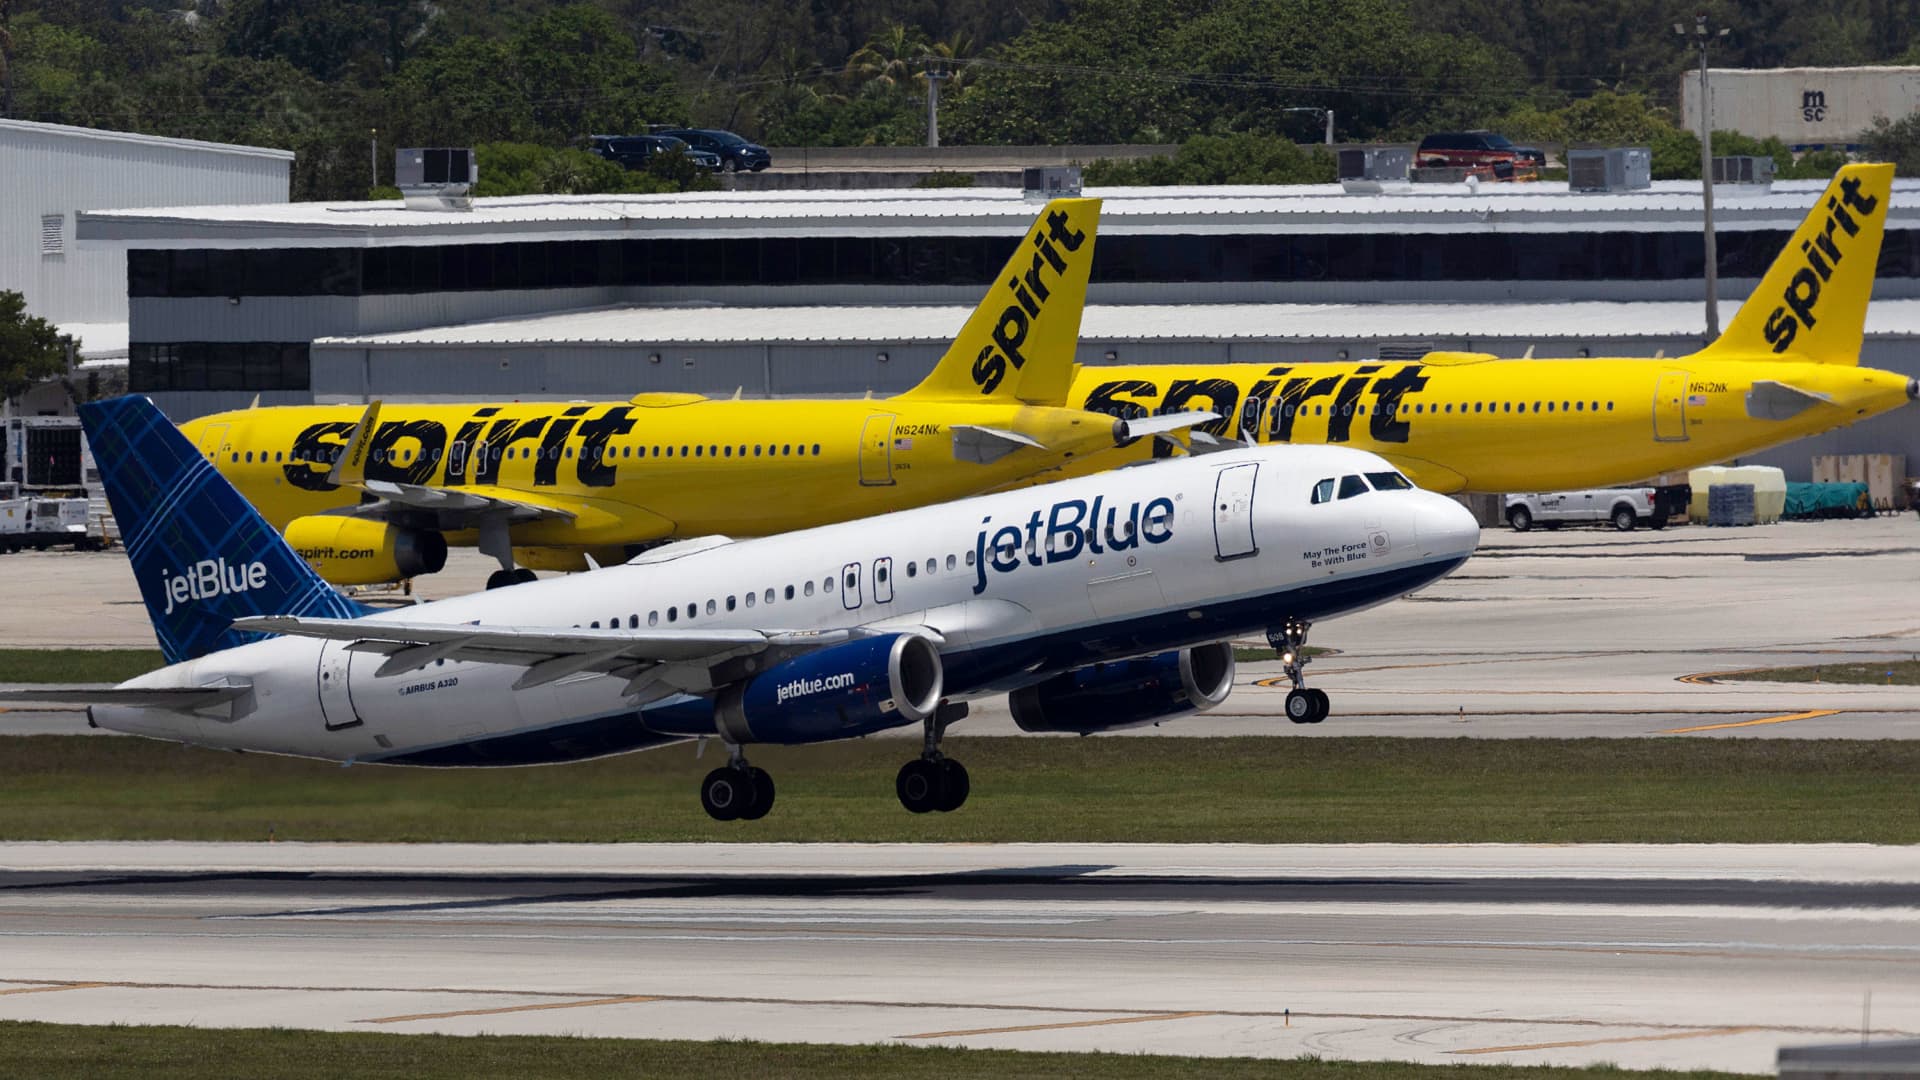 Spirit Airlines postpones shareholder meeting to continue deal talks with Frontier and JetBlue – CNBC